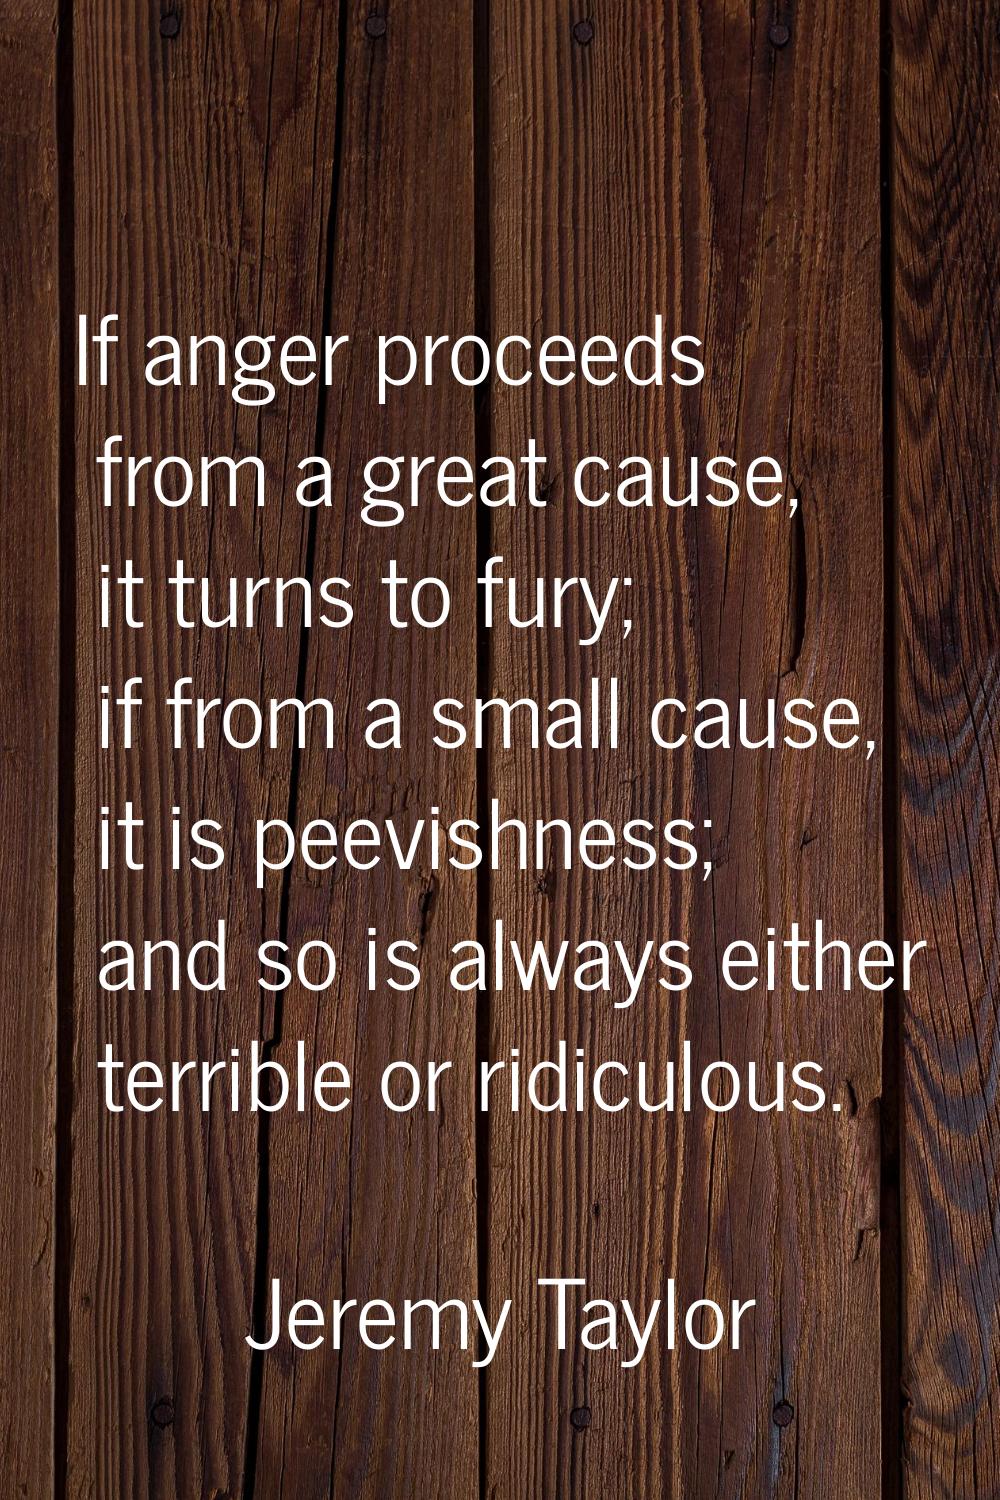 If anger proceeds from a great cause, it turns to fury; if from a small cause, it is peevishness; a